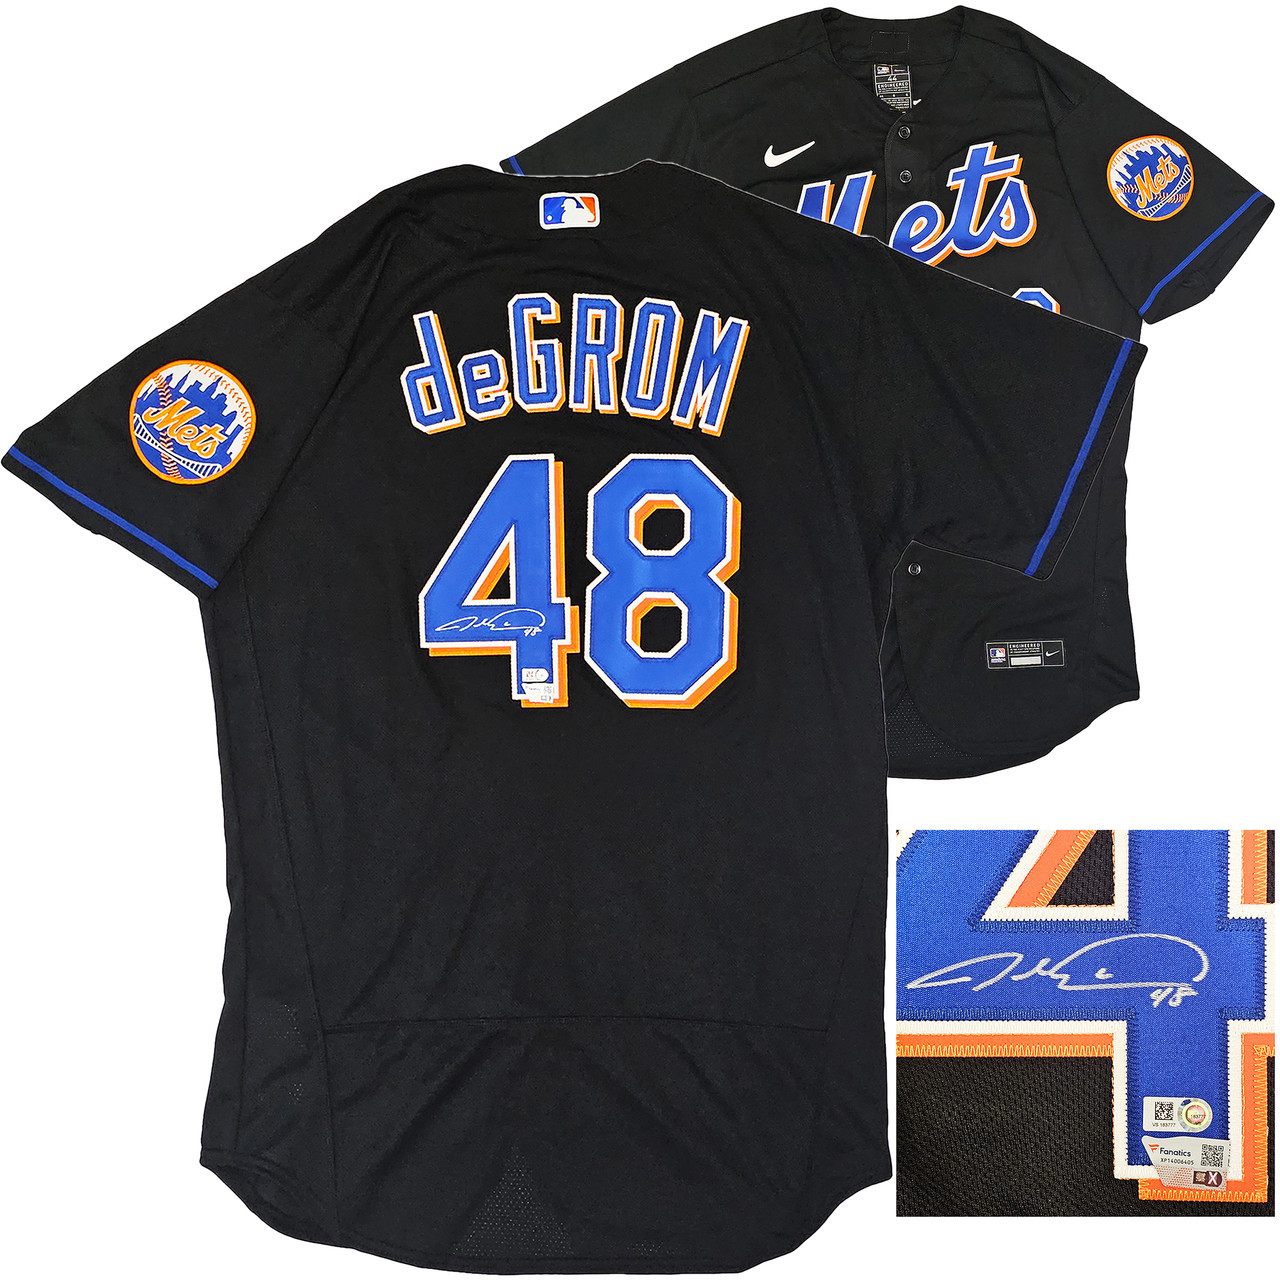 MLB Jacob deGrom Signed Jerseys, Collectible Jacob deGrom Signed